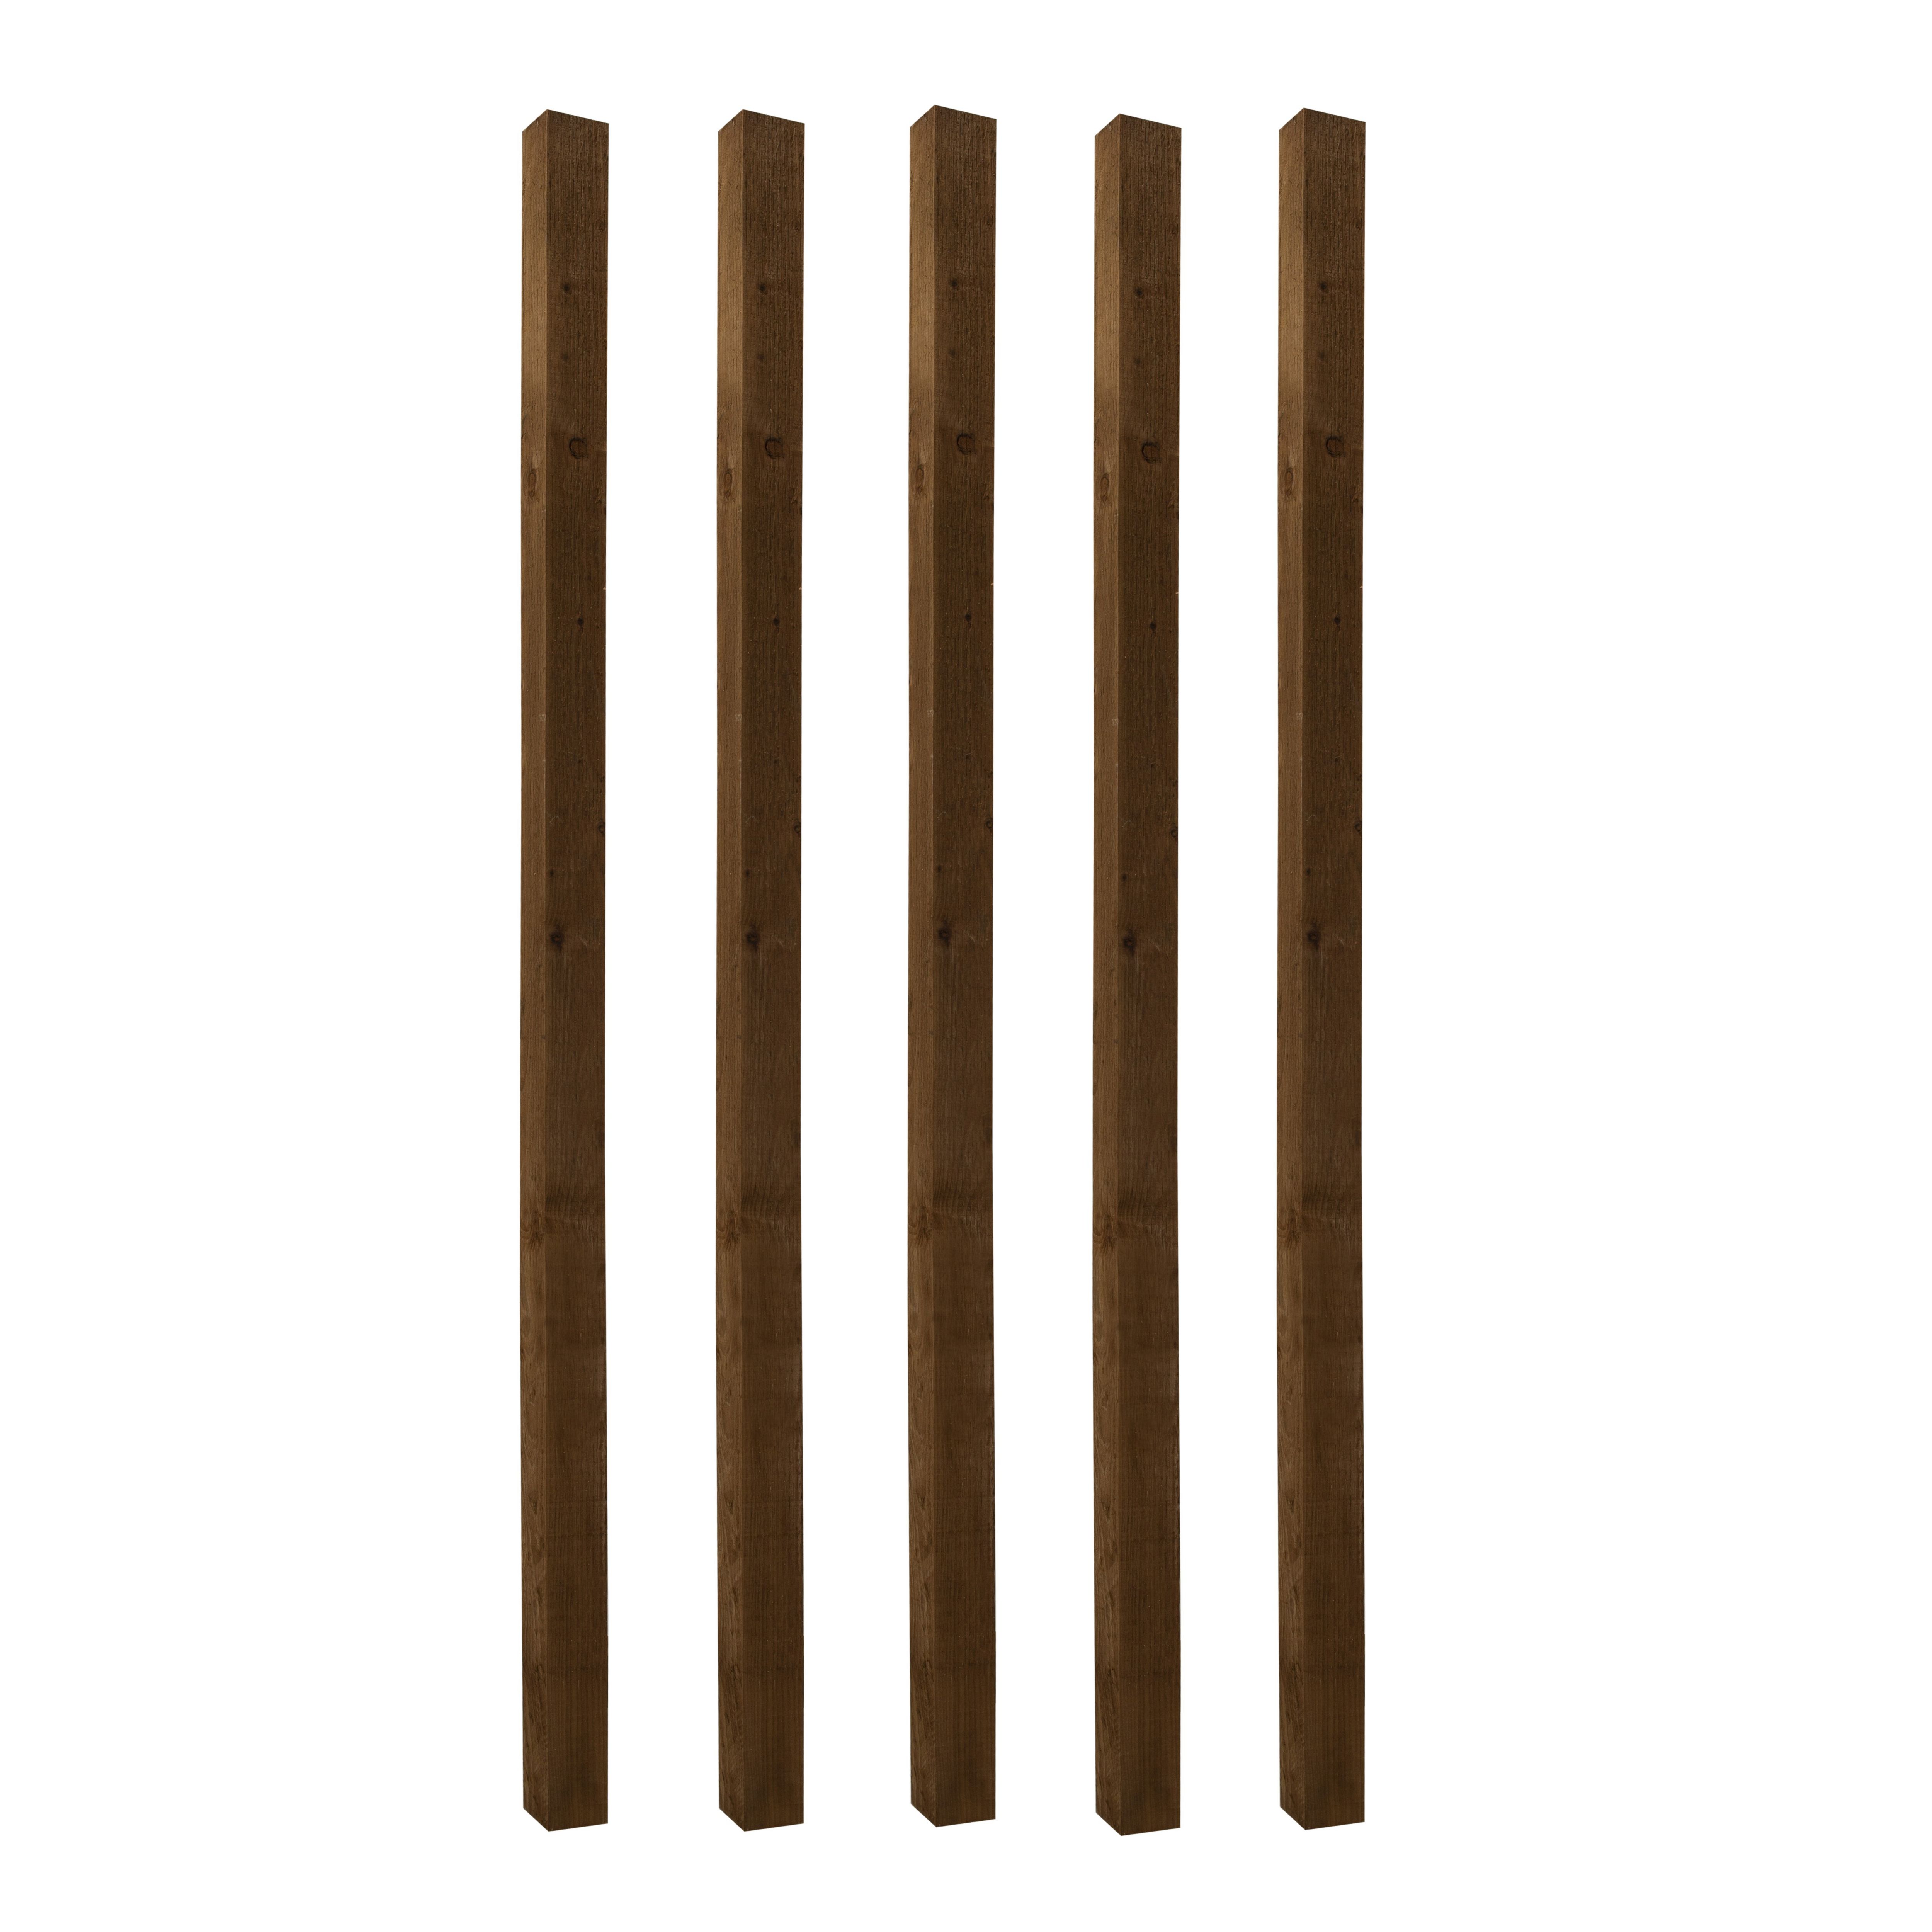 UC4 Brown Square Wooden Fence post (H)2.1m (W)75mm, Pack of 5